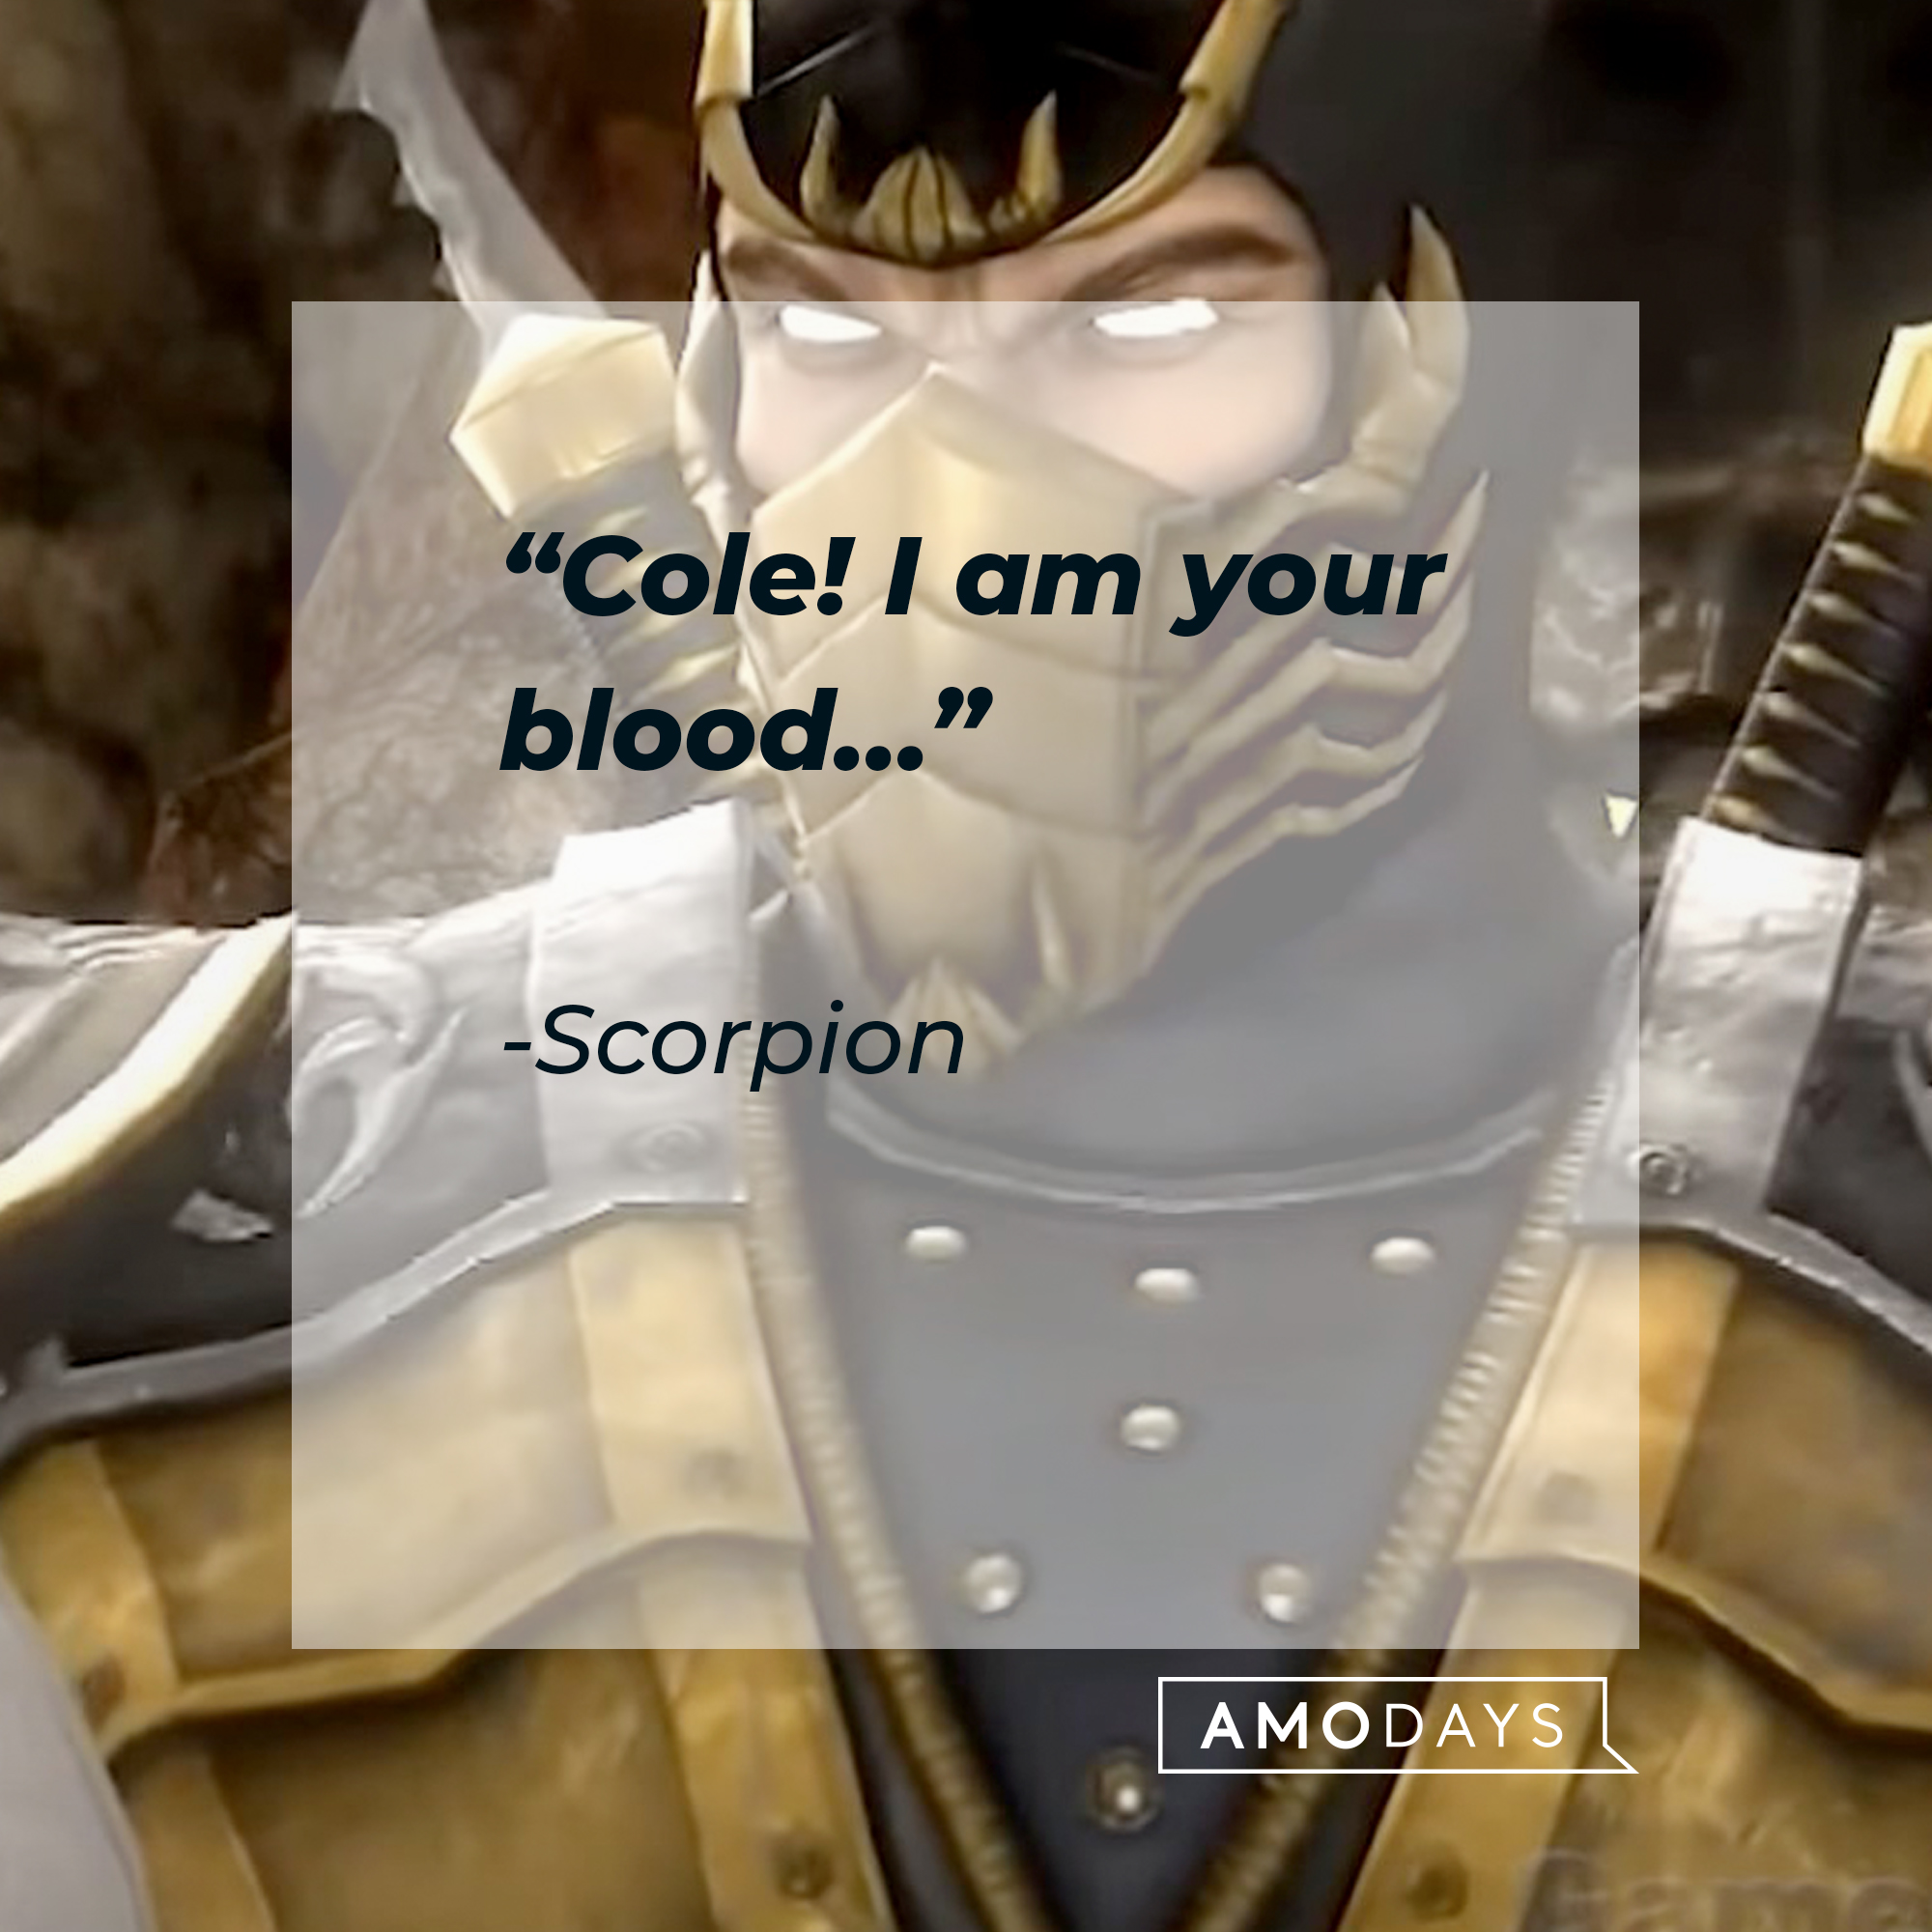 An image of Scorpion with his quote: “Cole! I am your blood…” | Source: facebook.com/MortalKombatUK